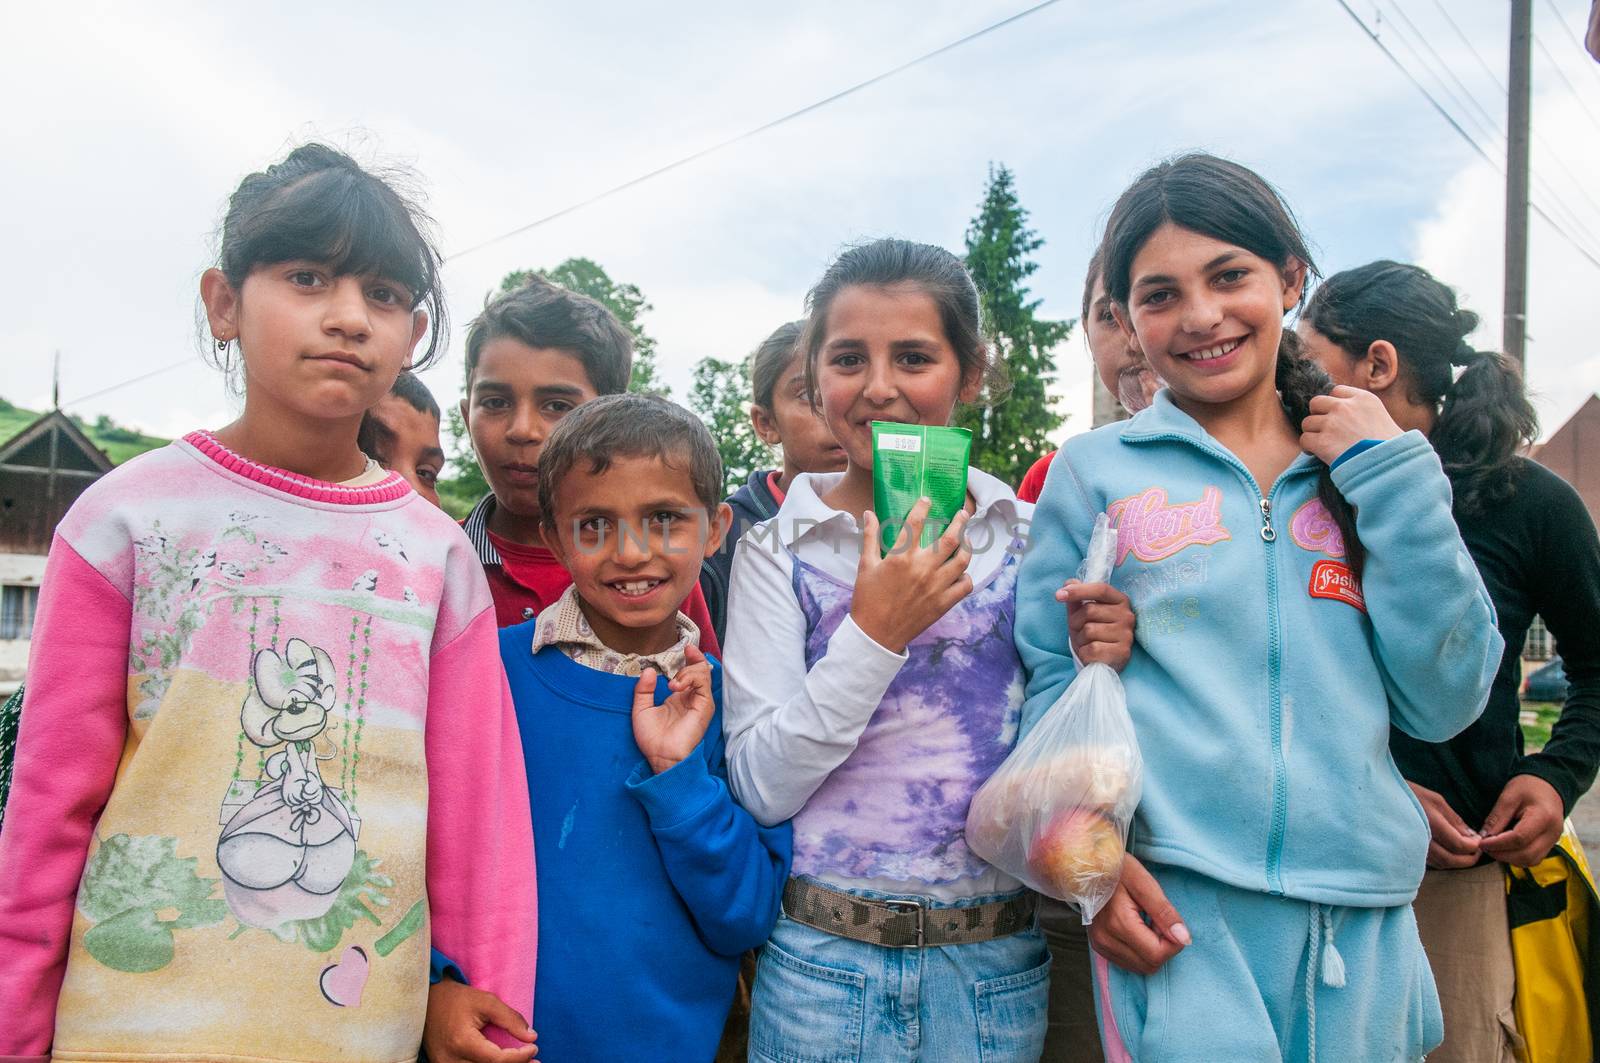 5/16/2018. Lomnicka, Slovakia. Roma community in the heart of Slovakia, living in horrible conditions. They suffer for poverty, stigma and luck of equal opportunities. Group shot of children and adolescents.